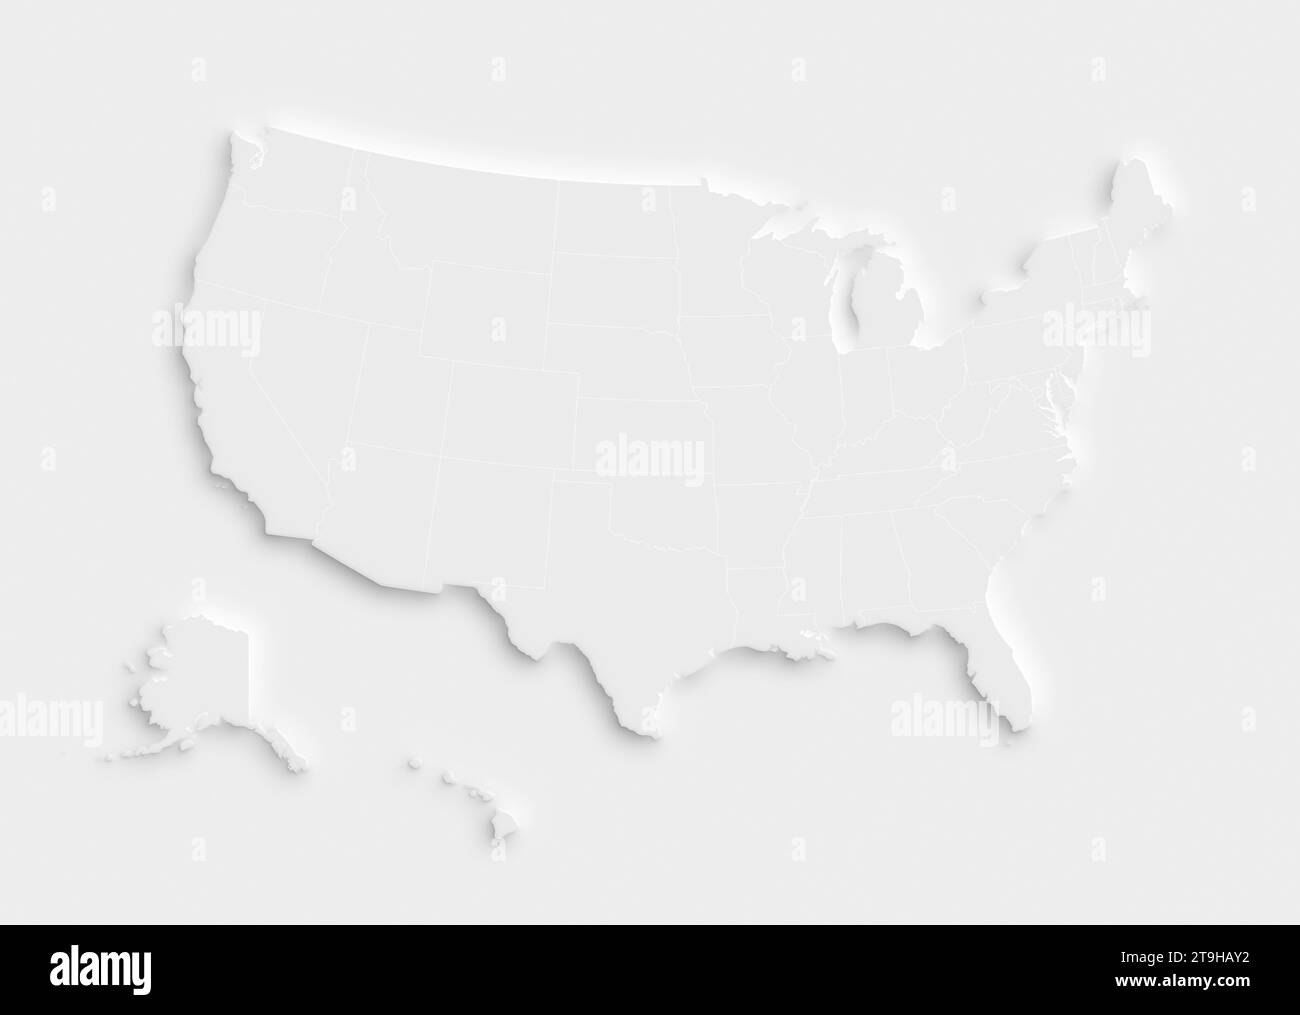 White map of the United States of America (USA, America) on white background with shadow or 3d effect. High resolution modern & clean map with states. Stock Photo